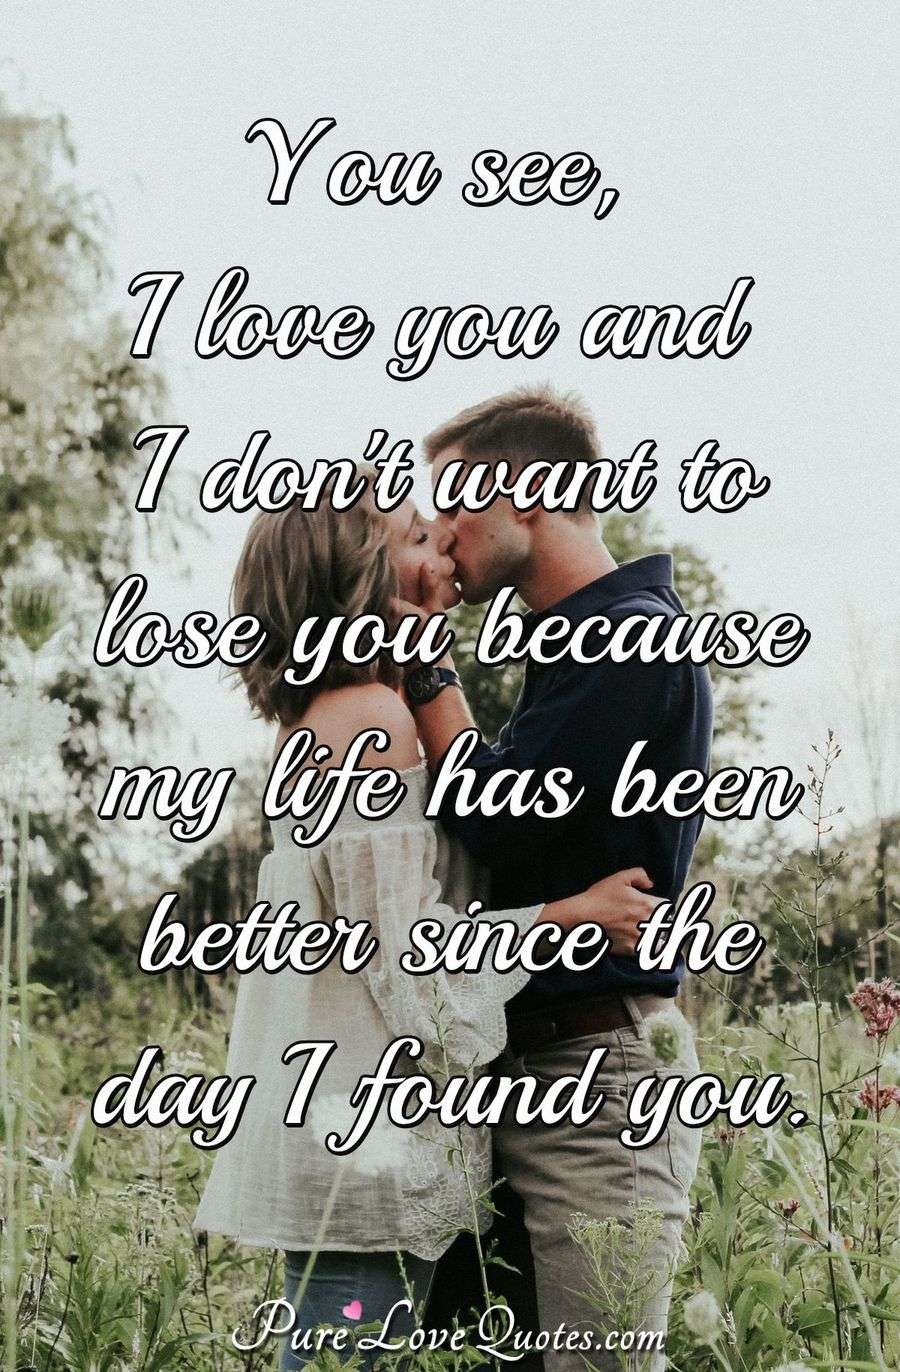 You see, I love you and I don't want to lose you because my life has been... | PureLoveQuotes